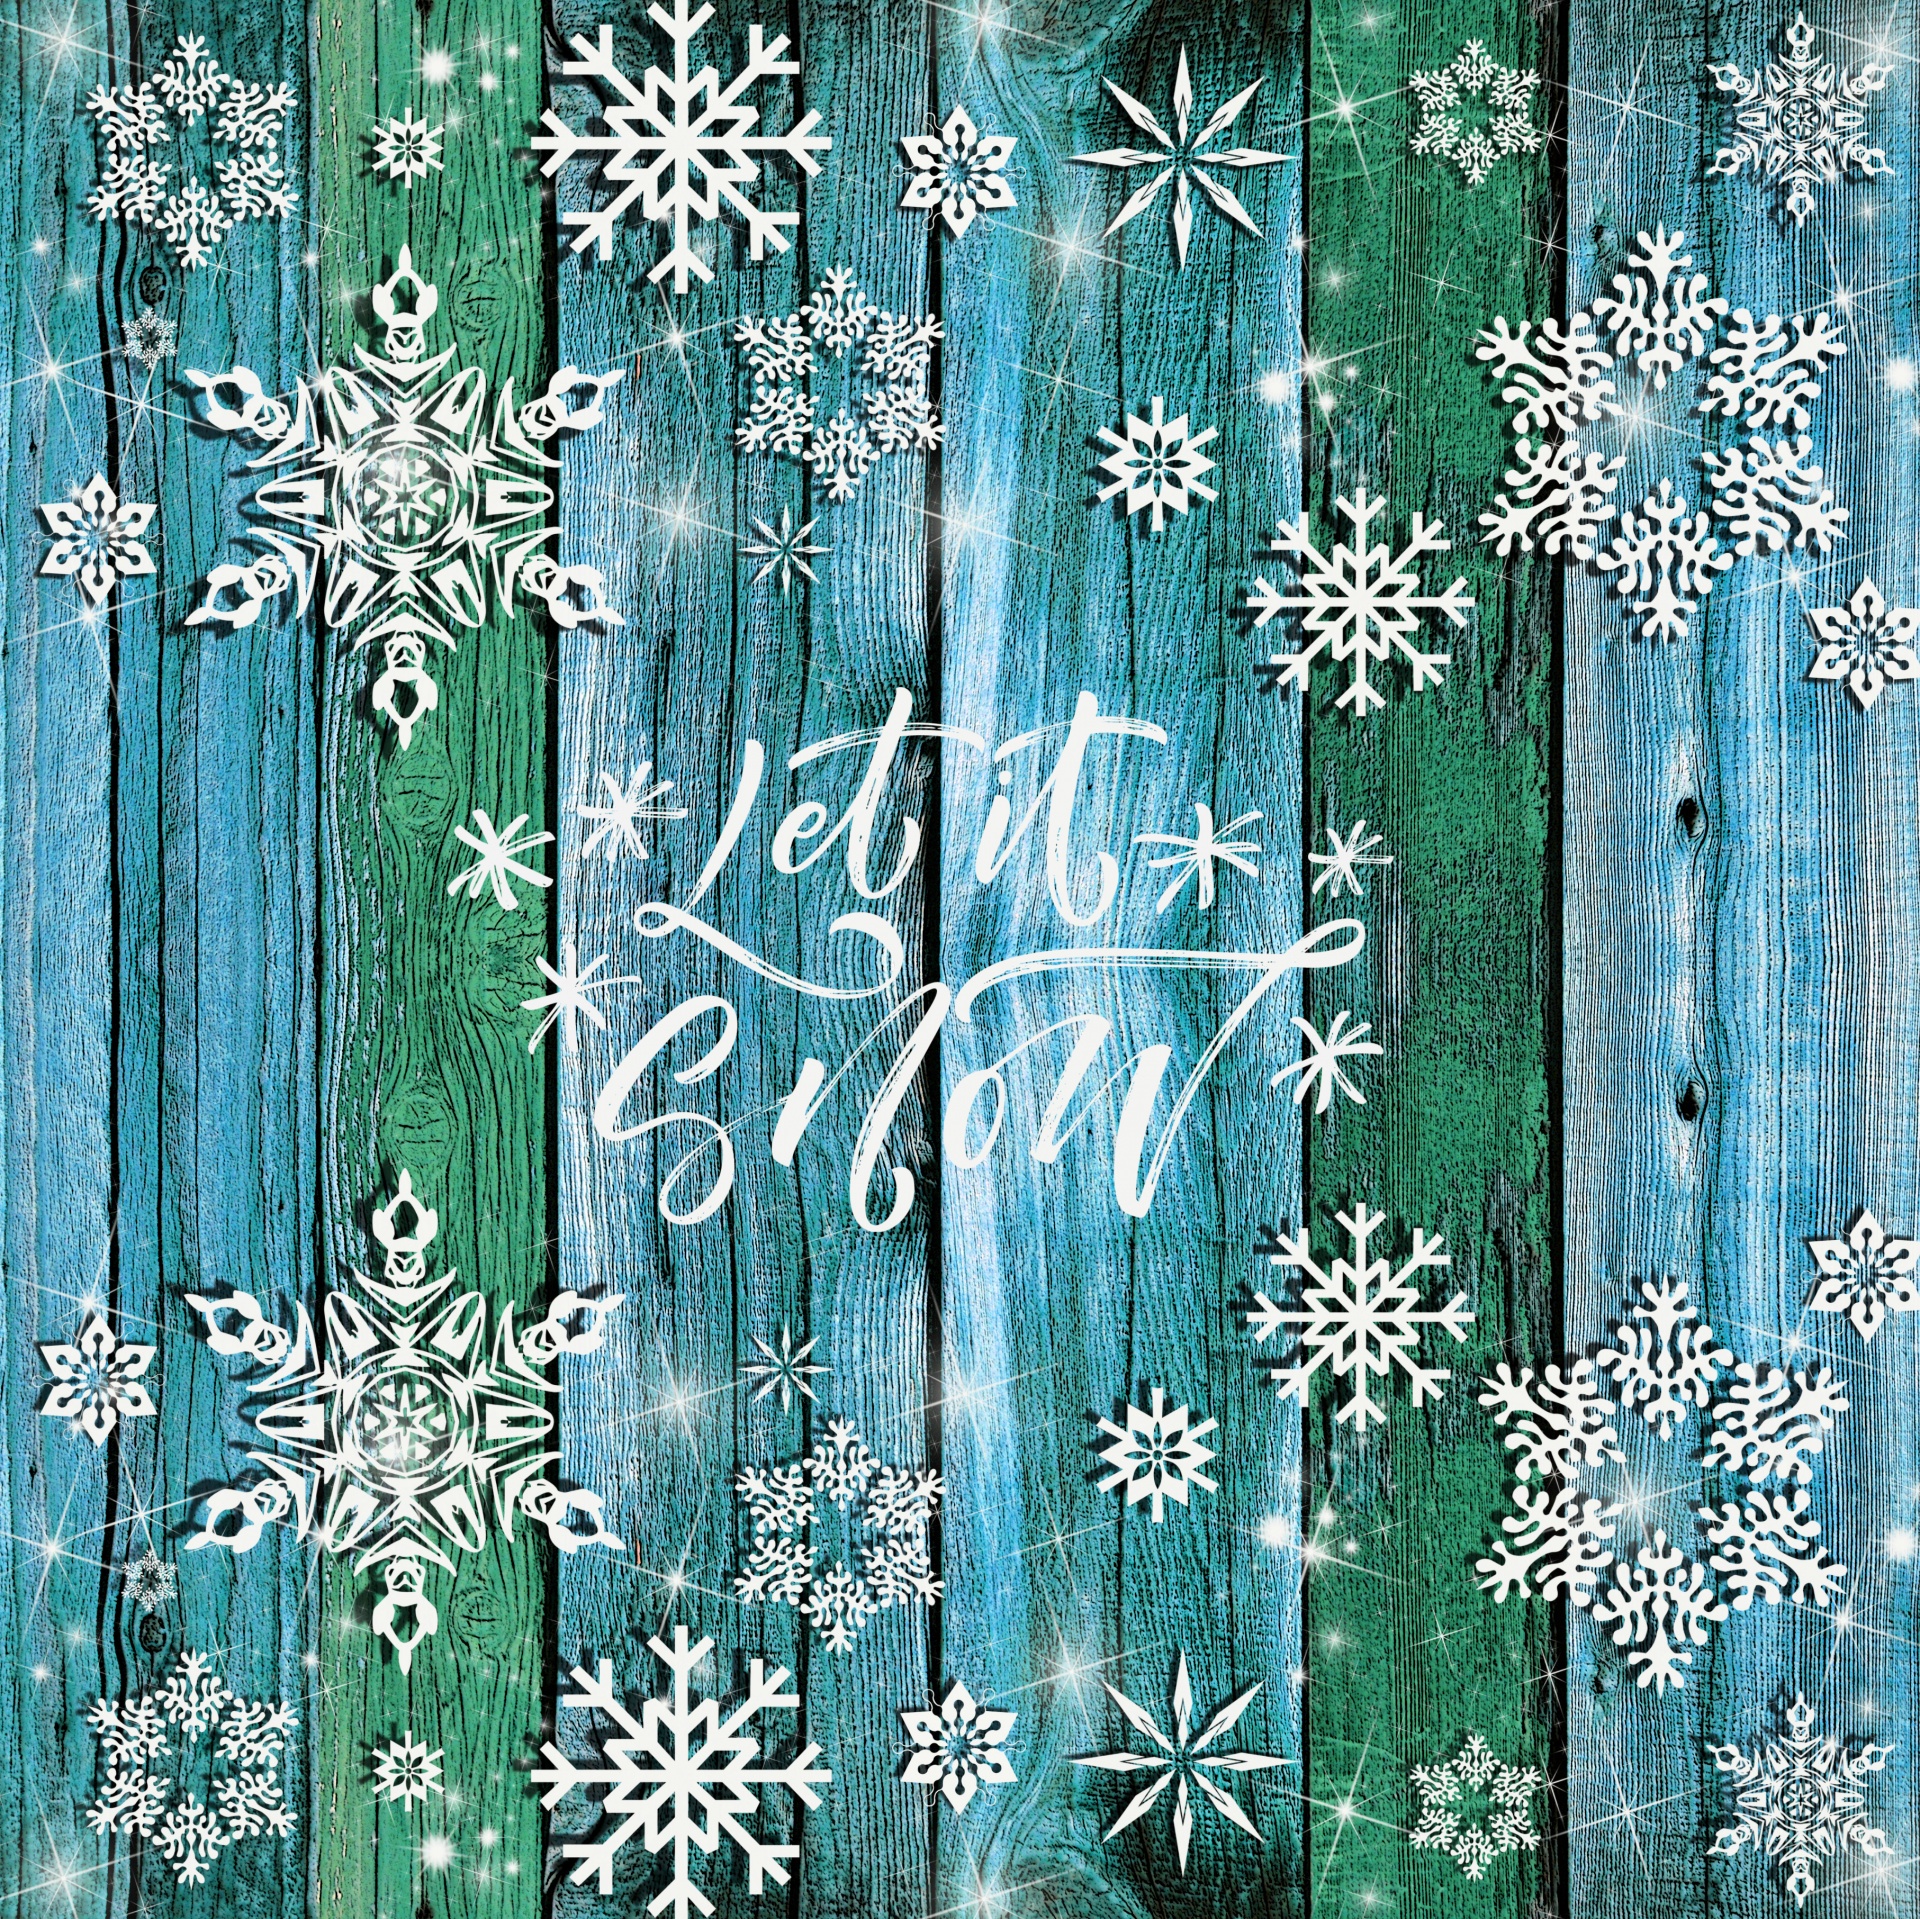 wooden fence with snow flake ornamentation at the top and bottom vertical and Let It Snow script